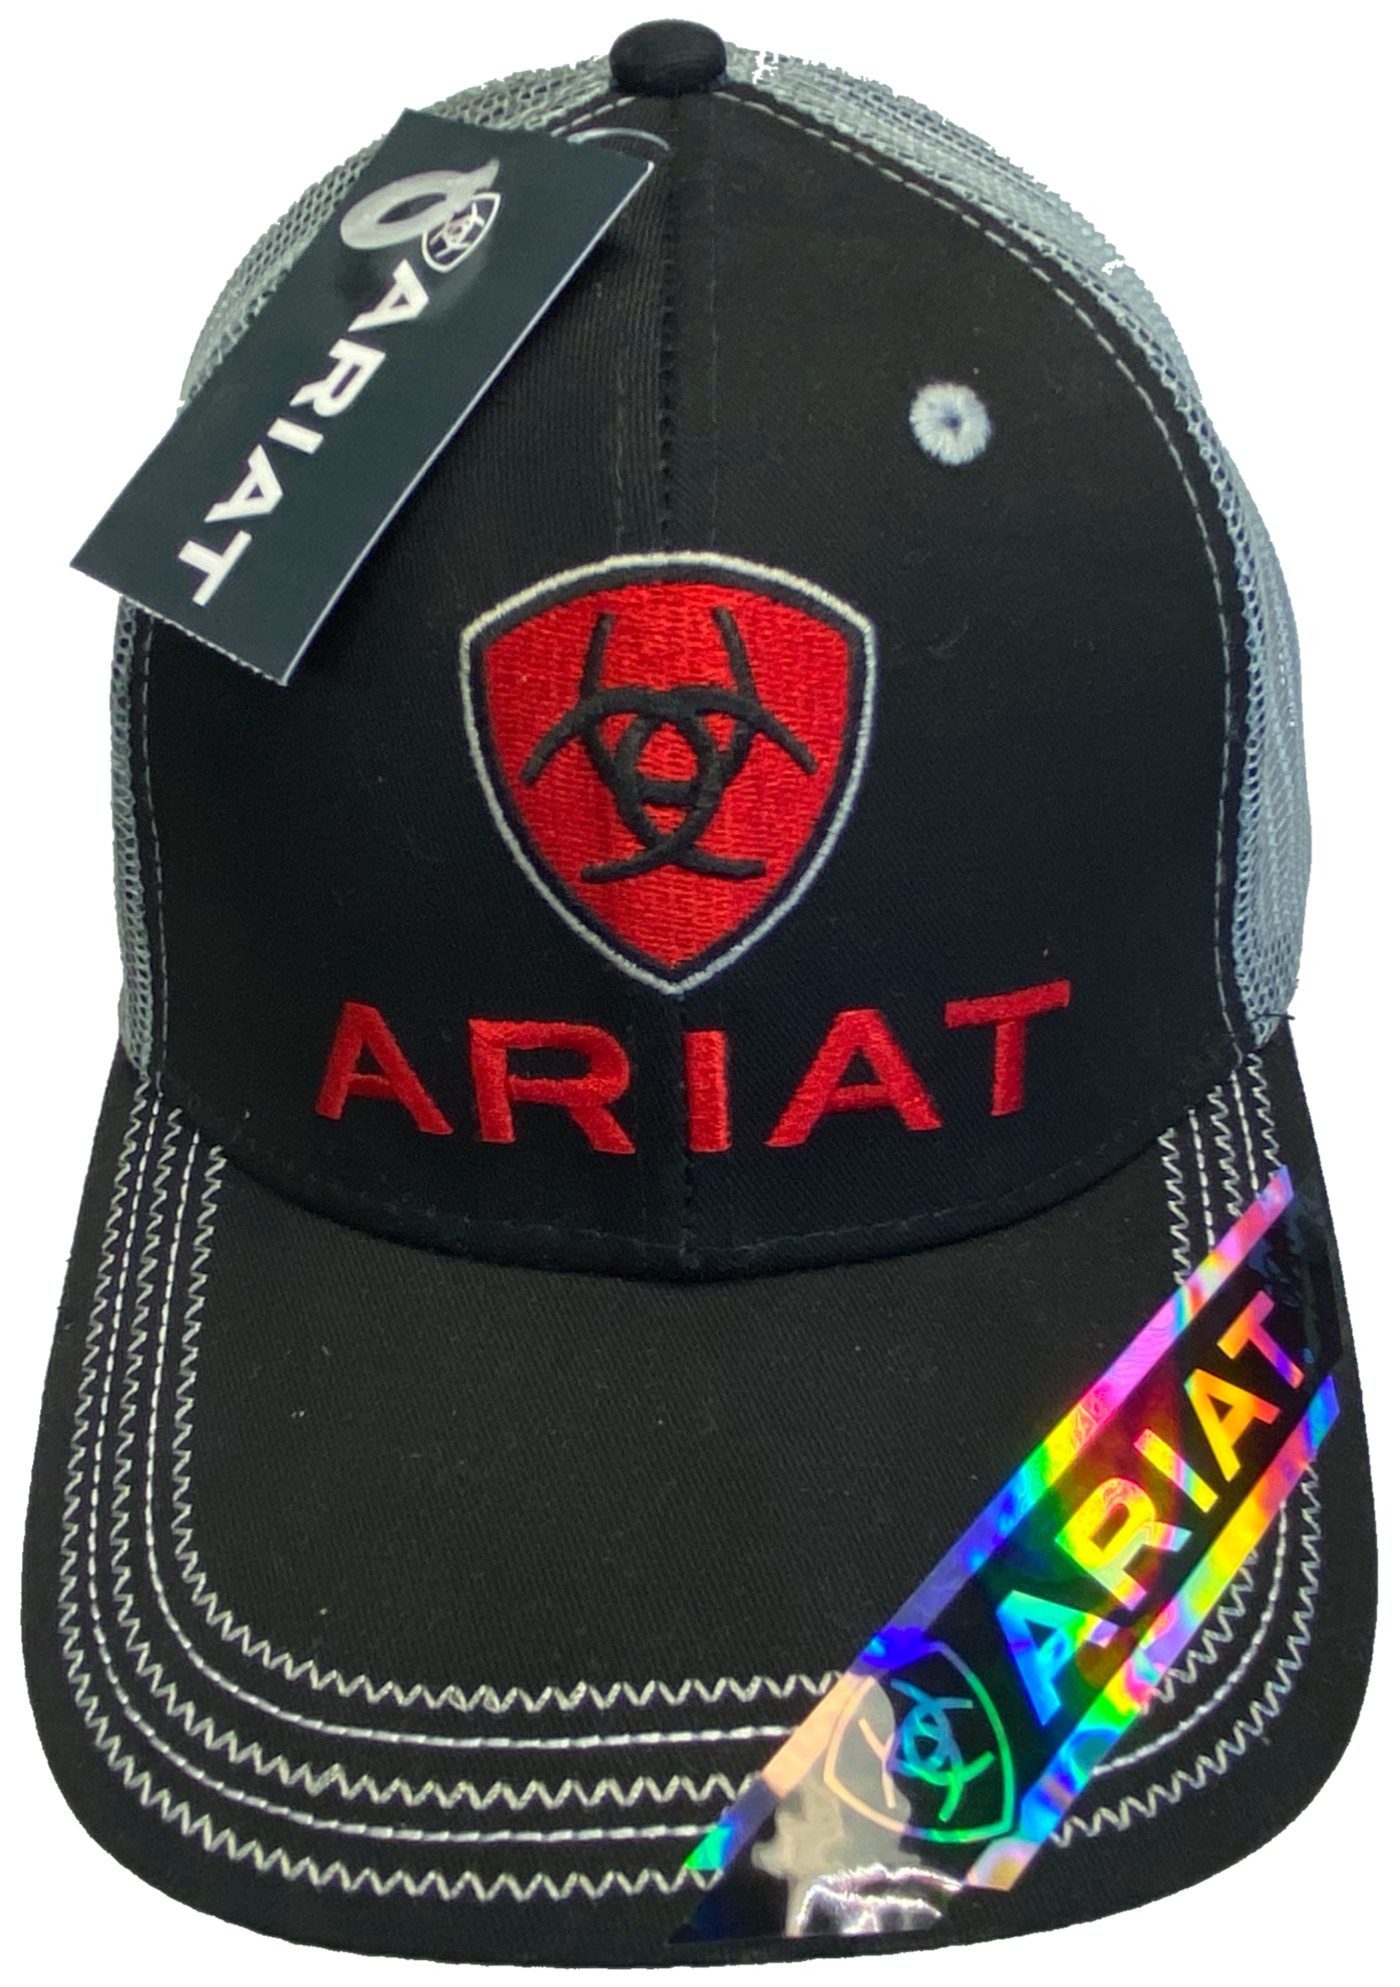 Black cap with grey mesh back and velcro closure. Structured front has red Ariat logo embroidered. Available for purchase at our shop just outside of Nashville in Smyrna, TN.